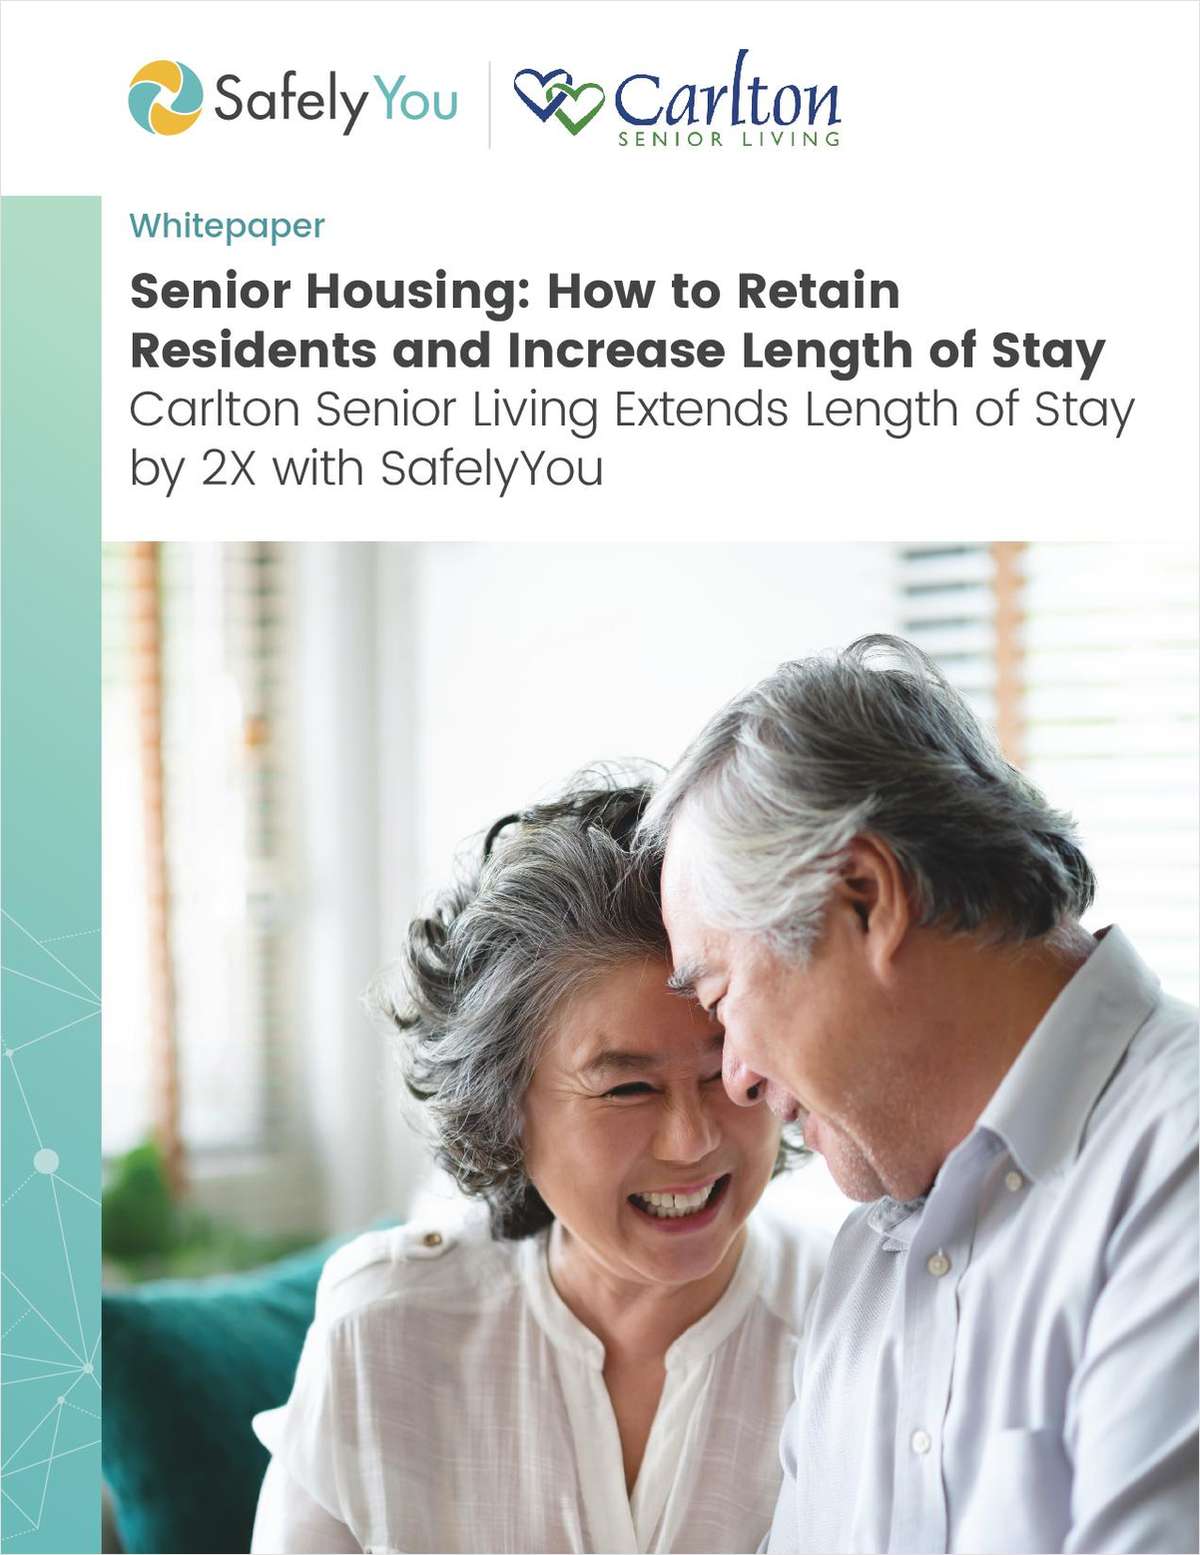 How to Retain Residents and Increase Length of Stay